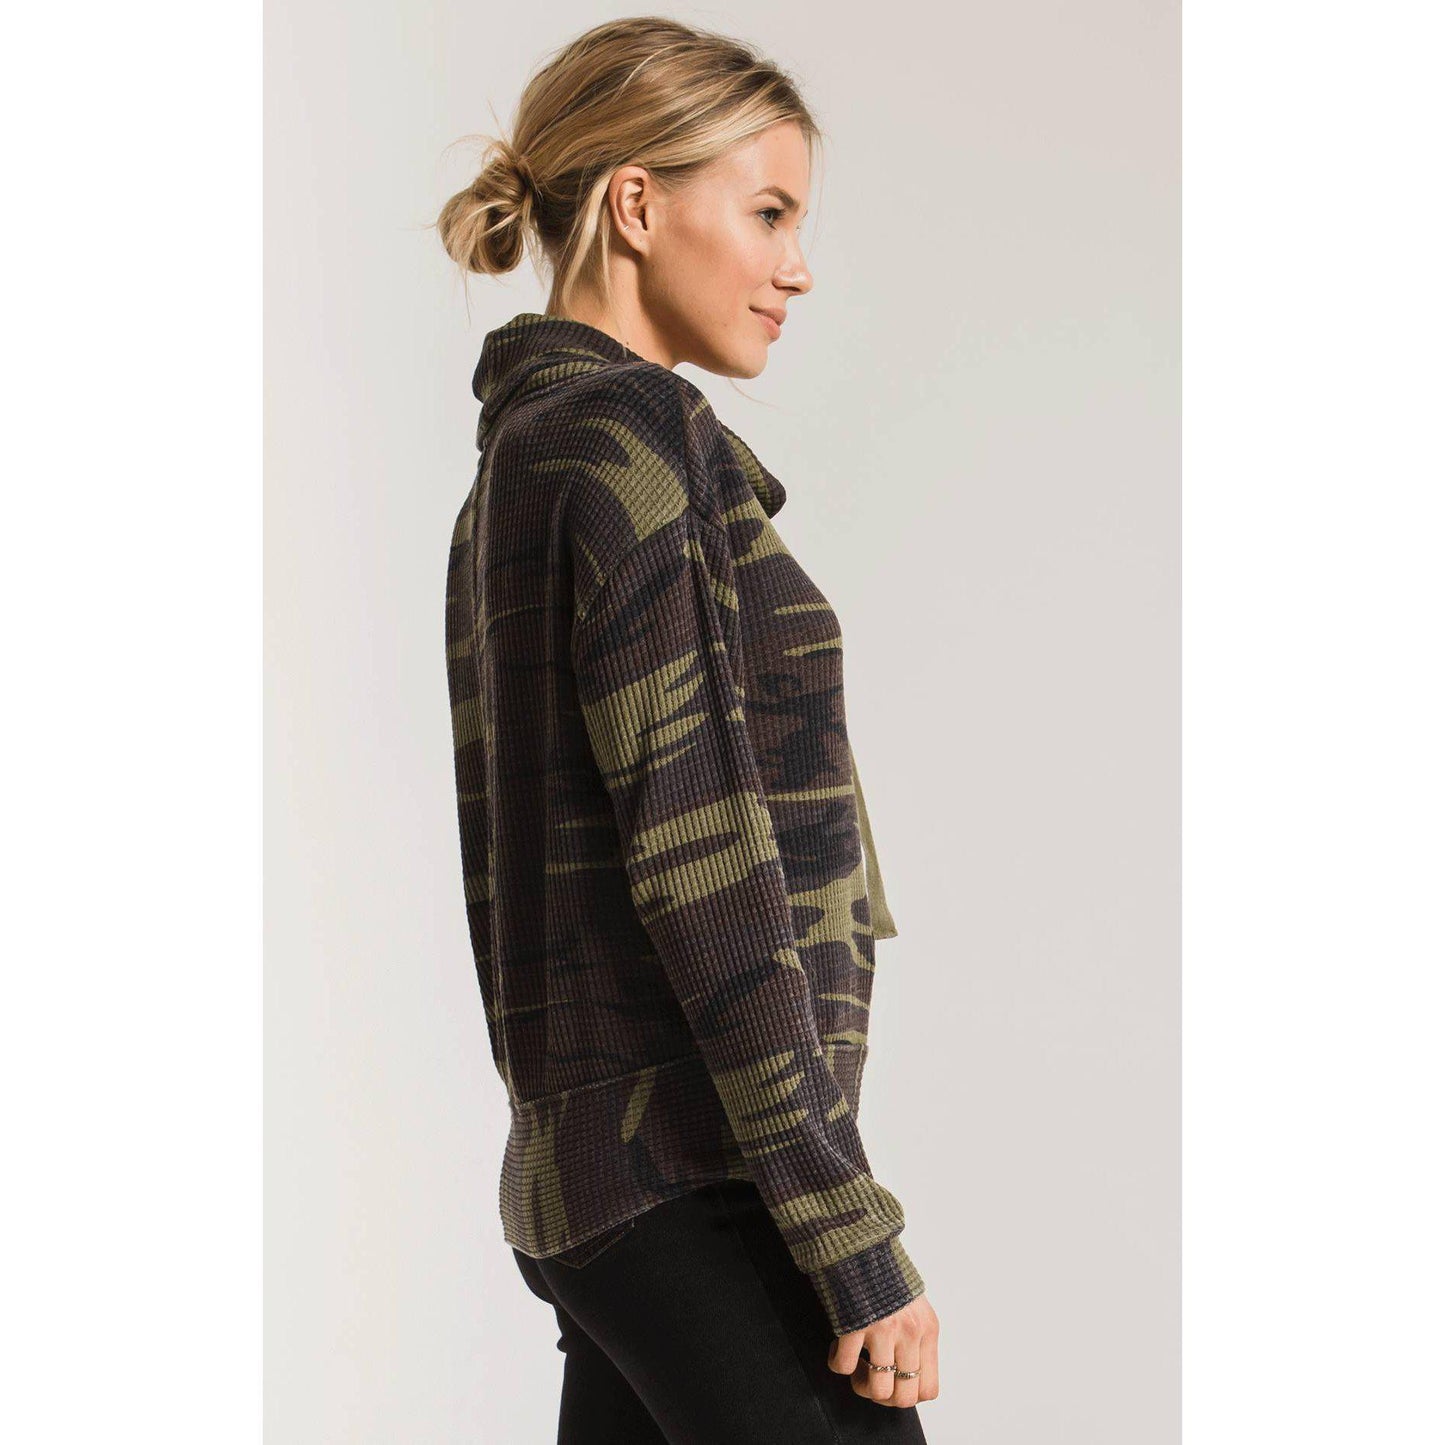 The Camo Cowl Neck Thermal Top